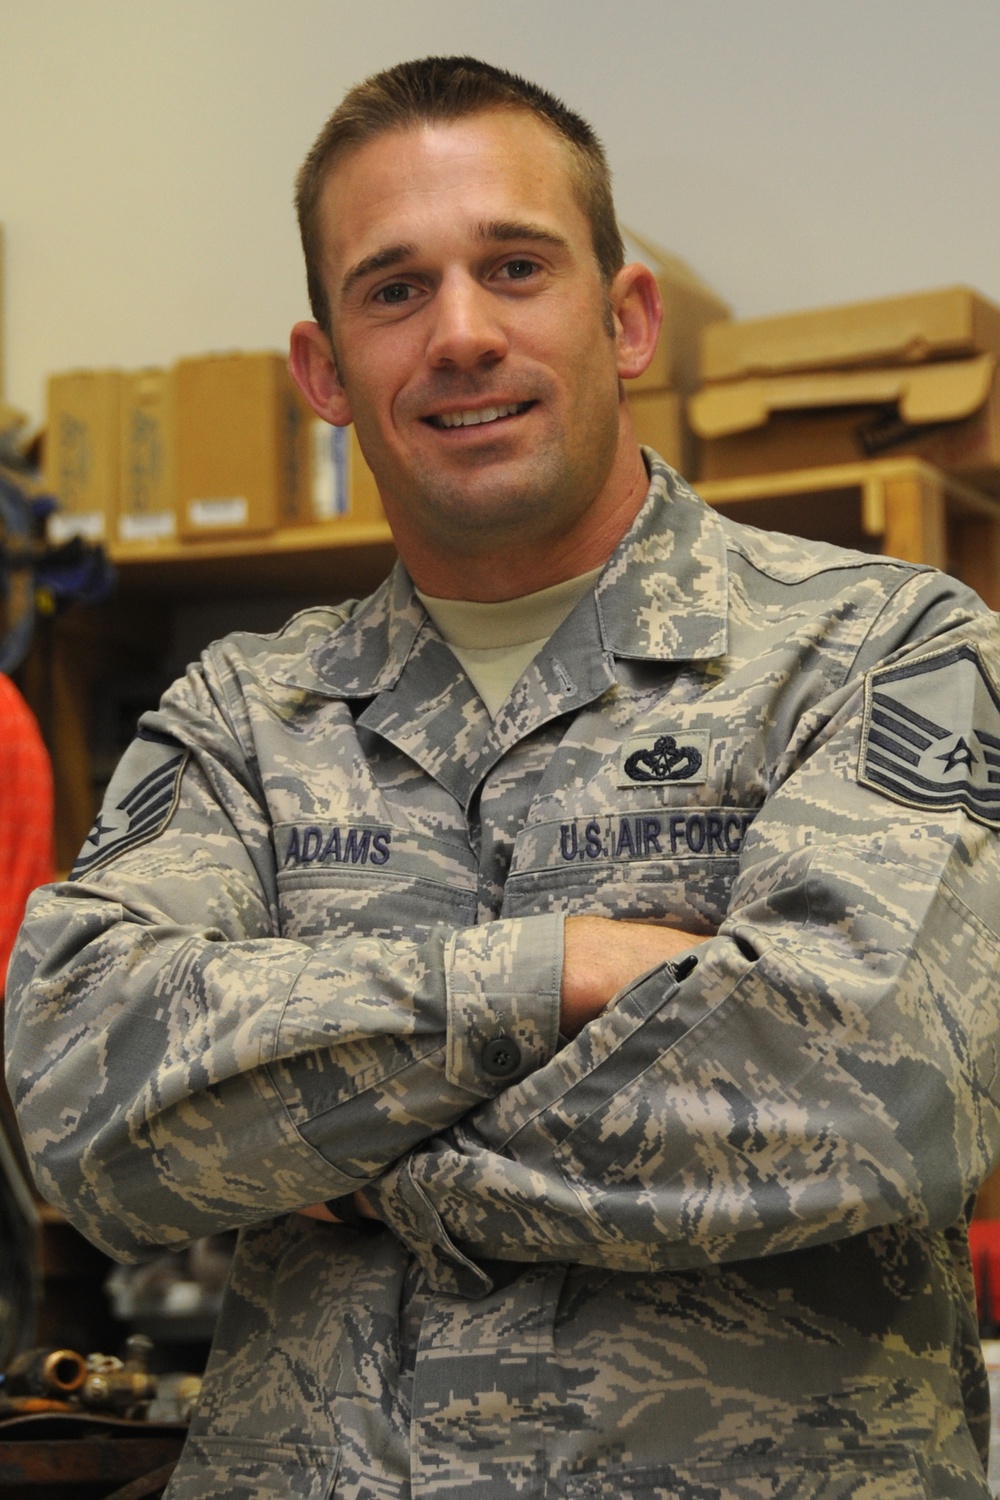 Vandenberg Senior NCO, Sonora Native, Leads Civil Engineer Section for Water, Fuels System Maintenance